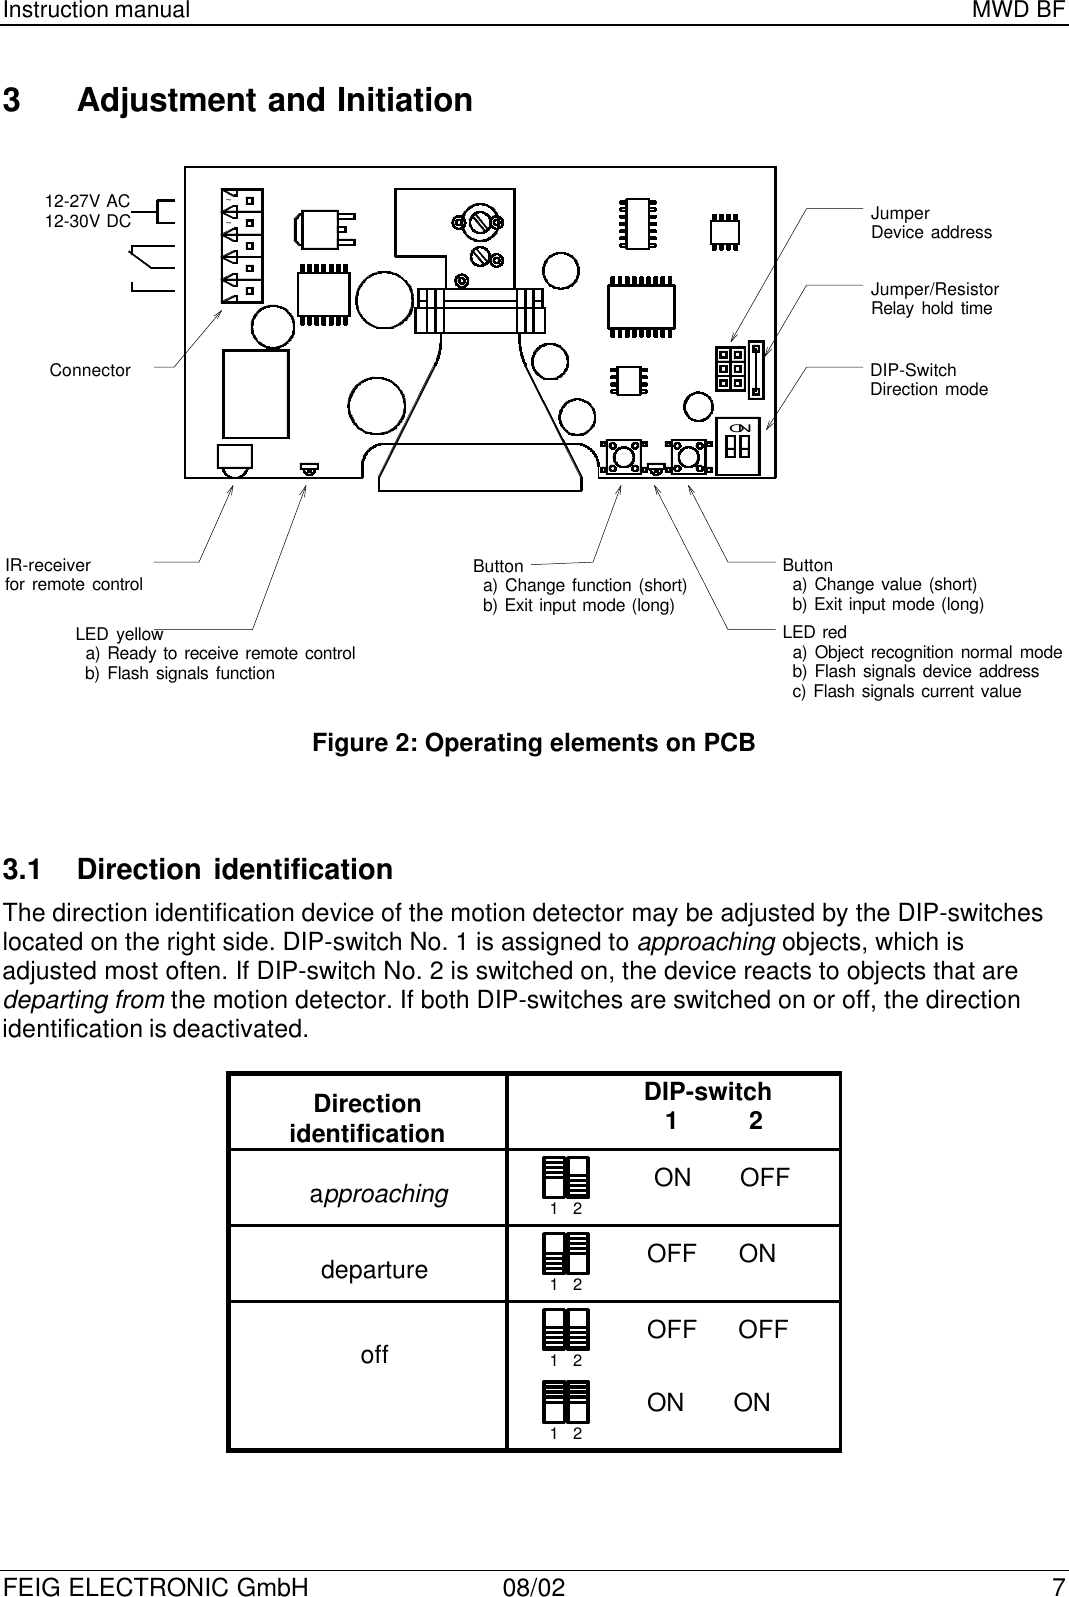 Instruction manual MWD BFFEIG ELECTRONIC GmbH 08/02 73Adjustment and Initiation3.1 Direction identificationThe direction identification device of the motion detector may be adjusted by the DIP-switcheslocated on the right side. DIP-switch No. 1 is assigned to approaching objects, which isadjusted most often. If DIP-switch No. 2 is switched on, the device reacts to objects that aredeparting from the motion detector. If both DIP-switches are switched on or off, the directionidentification is deactivated.DirectionidentificationDIP-switch1          2approaching 1   2ON       OFFdeparture 1   2OFF      ONoff 1   2OFF      OFF1   2ON       ONButtona) Change function (short)b) Exit input mode (long)LED yellowa) Ready to receive remote controlb) Flash signals functionIR-receiverfor remote controlConnector12-27V AC12-30V DC~~DIP-SwitchDirection modeONButtona) Change value (short)b) Exit input mode (long)LED reda) Object recognition normal modeb) Flash signals device addressc) Flash signals current valueJumperDevice addressJumper/ResistorRelay hold timeFigure 2: Operating elements on PCB